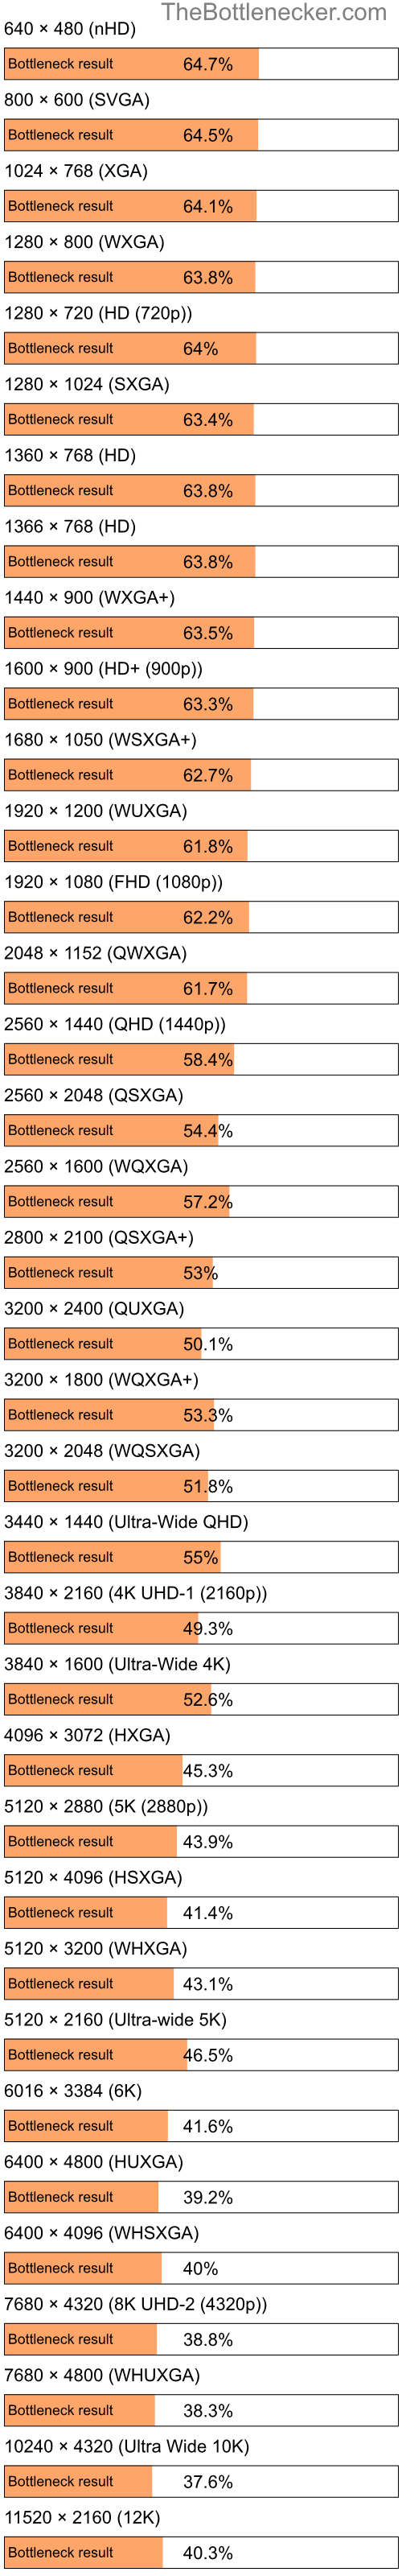 Bottleneck results by resolution for Intel Core i5-3550 and NVIDIA GeForce RTX 4090 in Graphic Card Intense Tasks